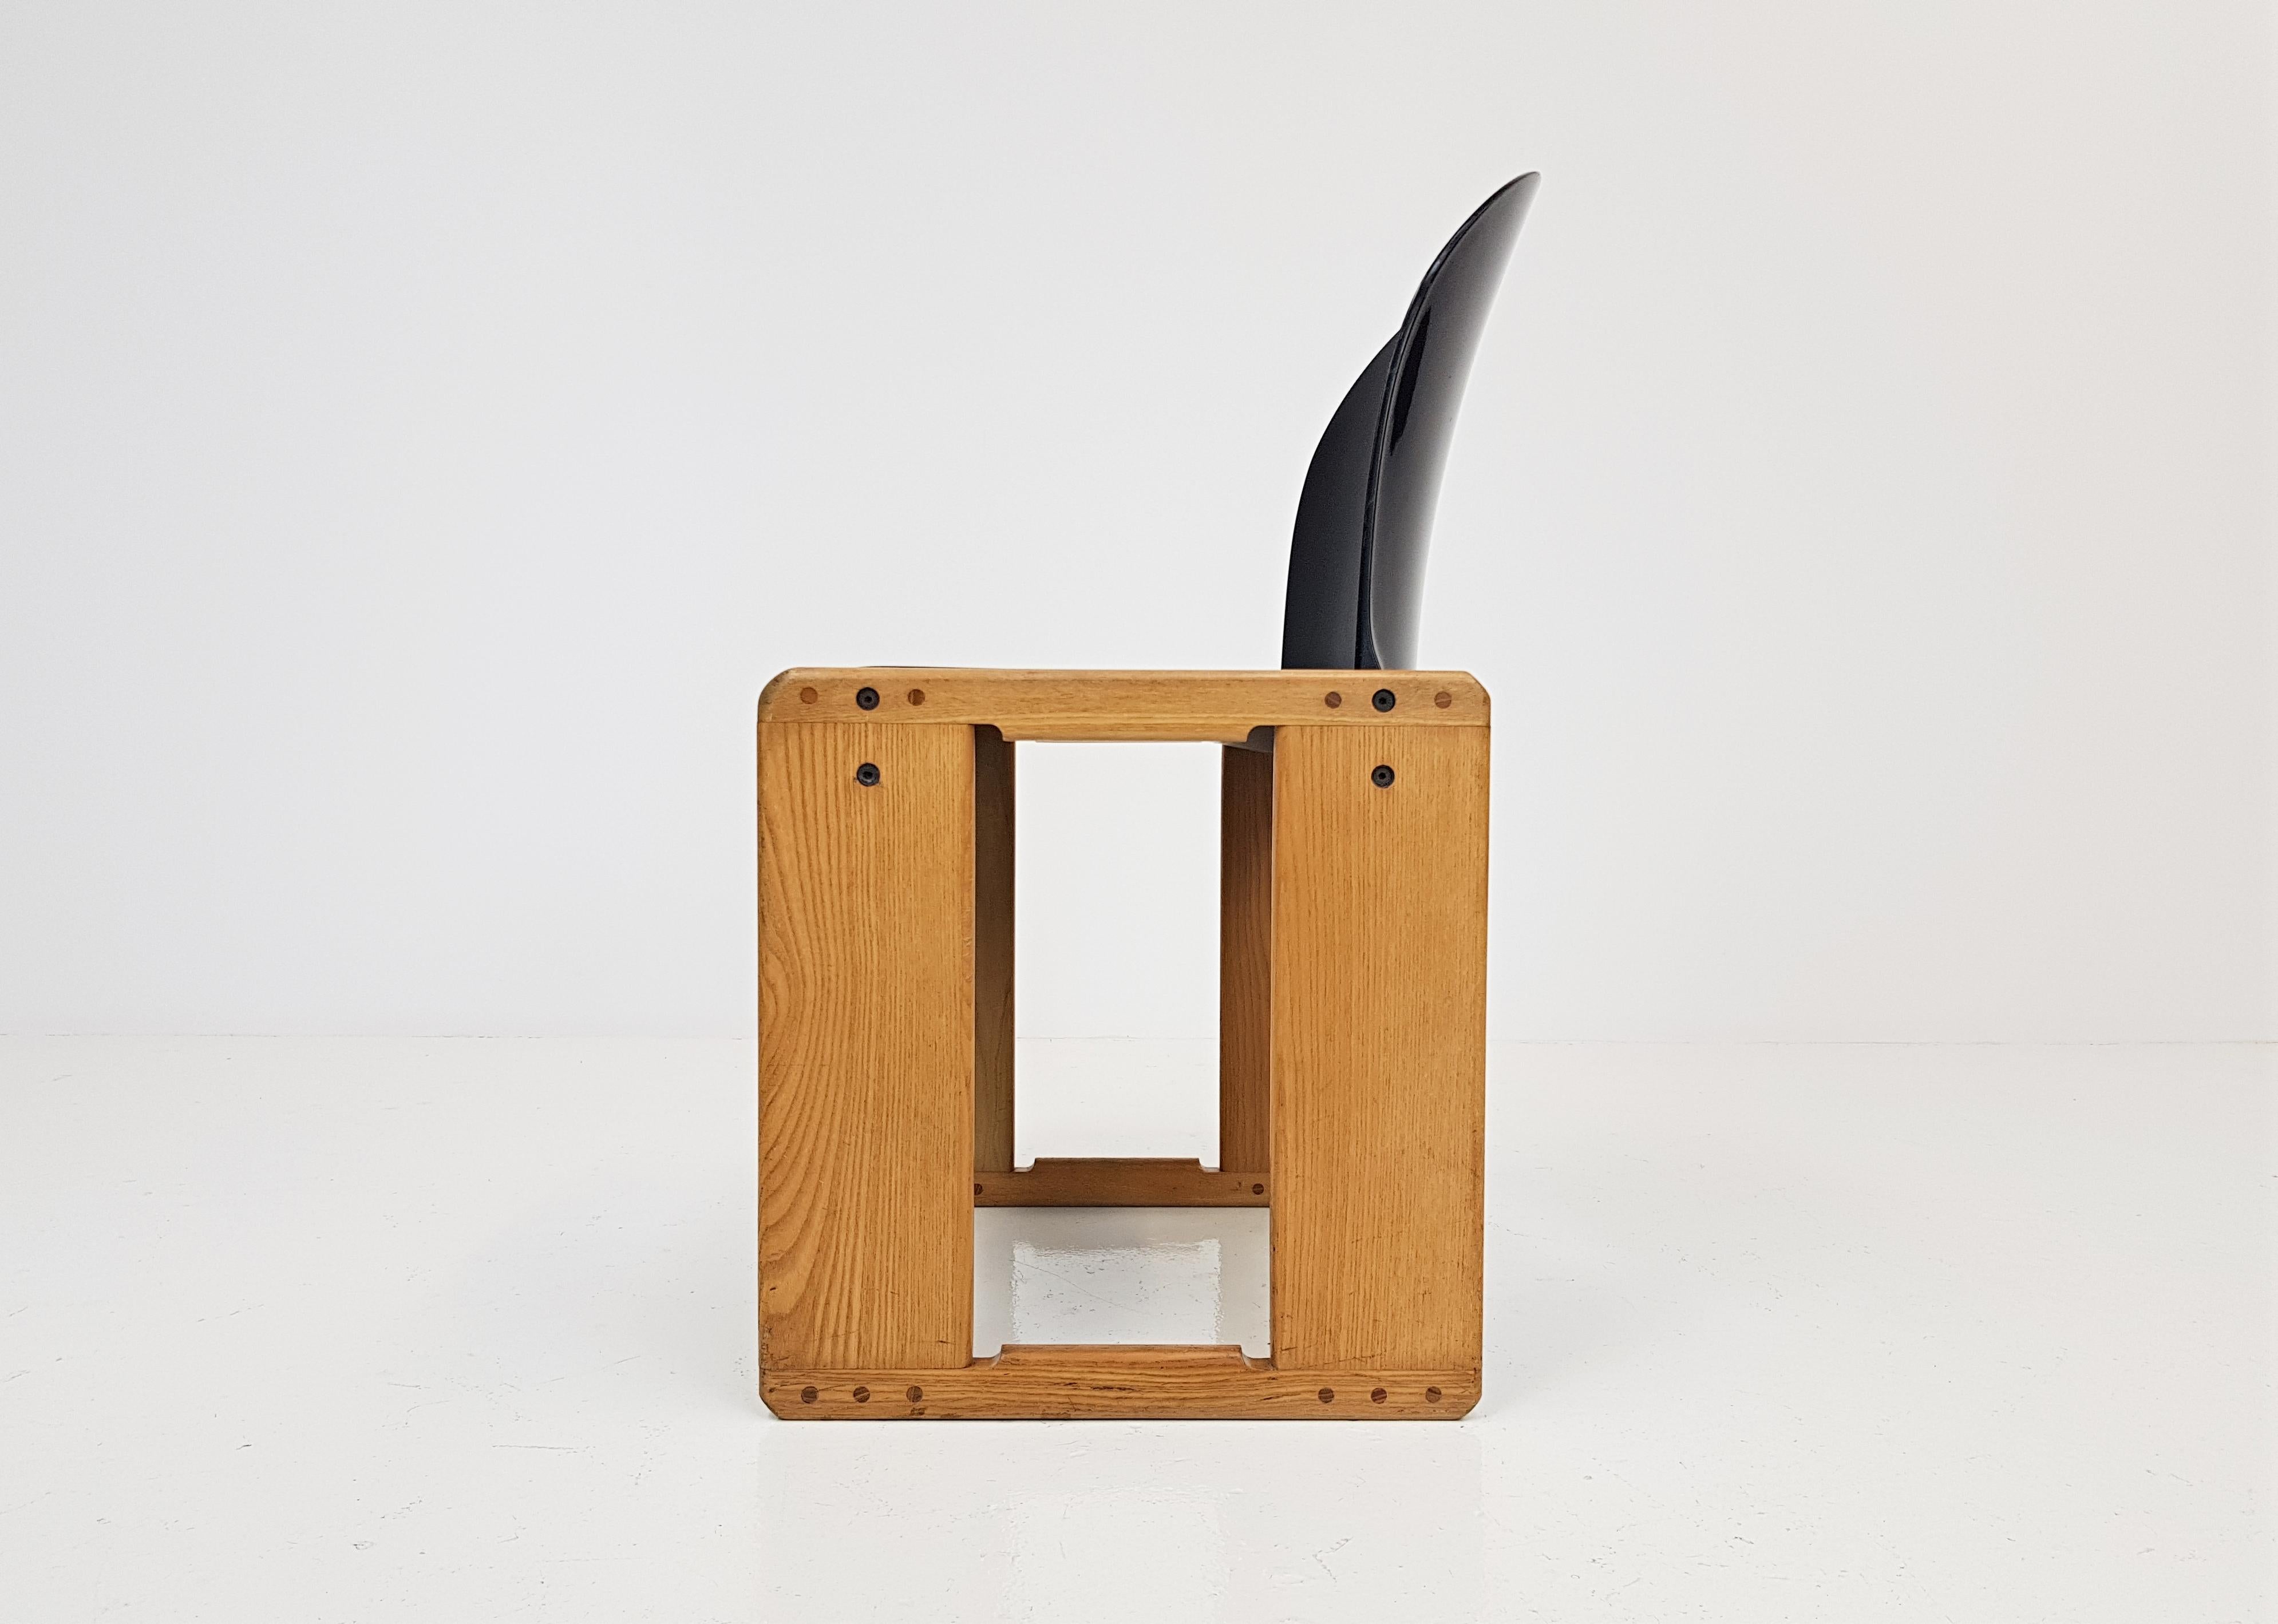 An Afra and Tobia Scarpa Dialogo chair for B&B Italia, 1970s.

The pieces feature an oak angular frame with a black fibreglass seat and back. The chairs are embossed with the B&B Italia makers mark.

Afra and Tobia Scarpa were award-winning